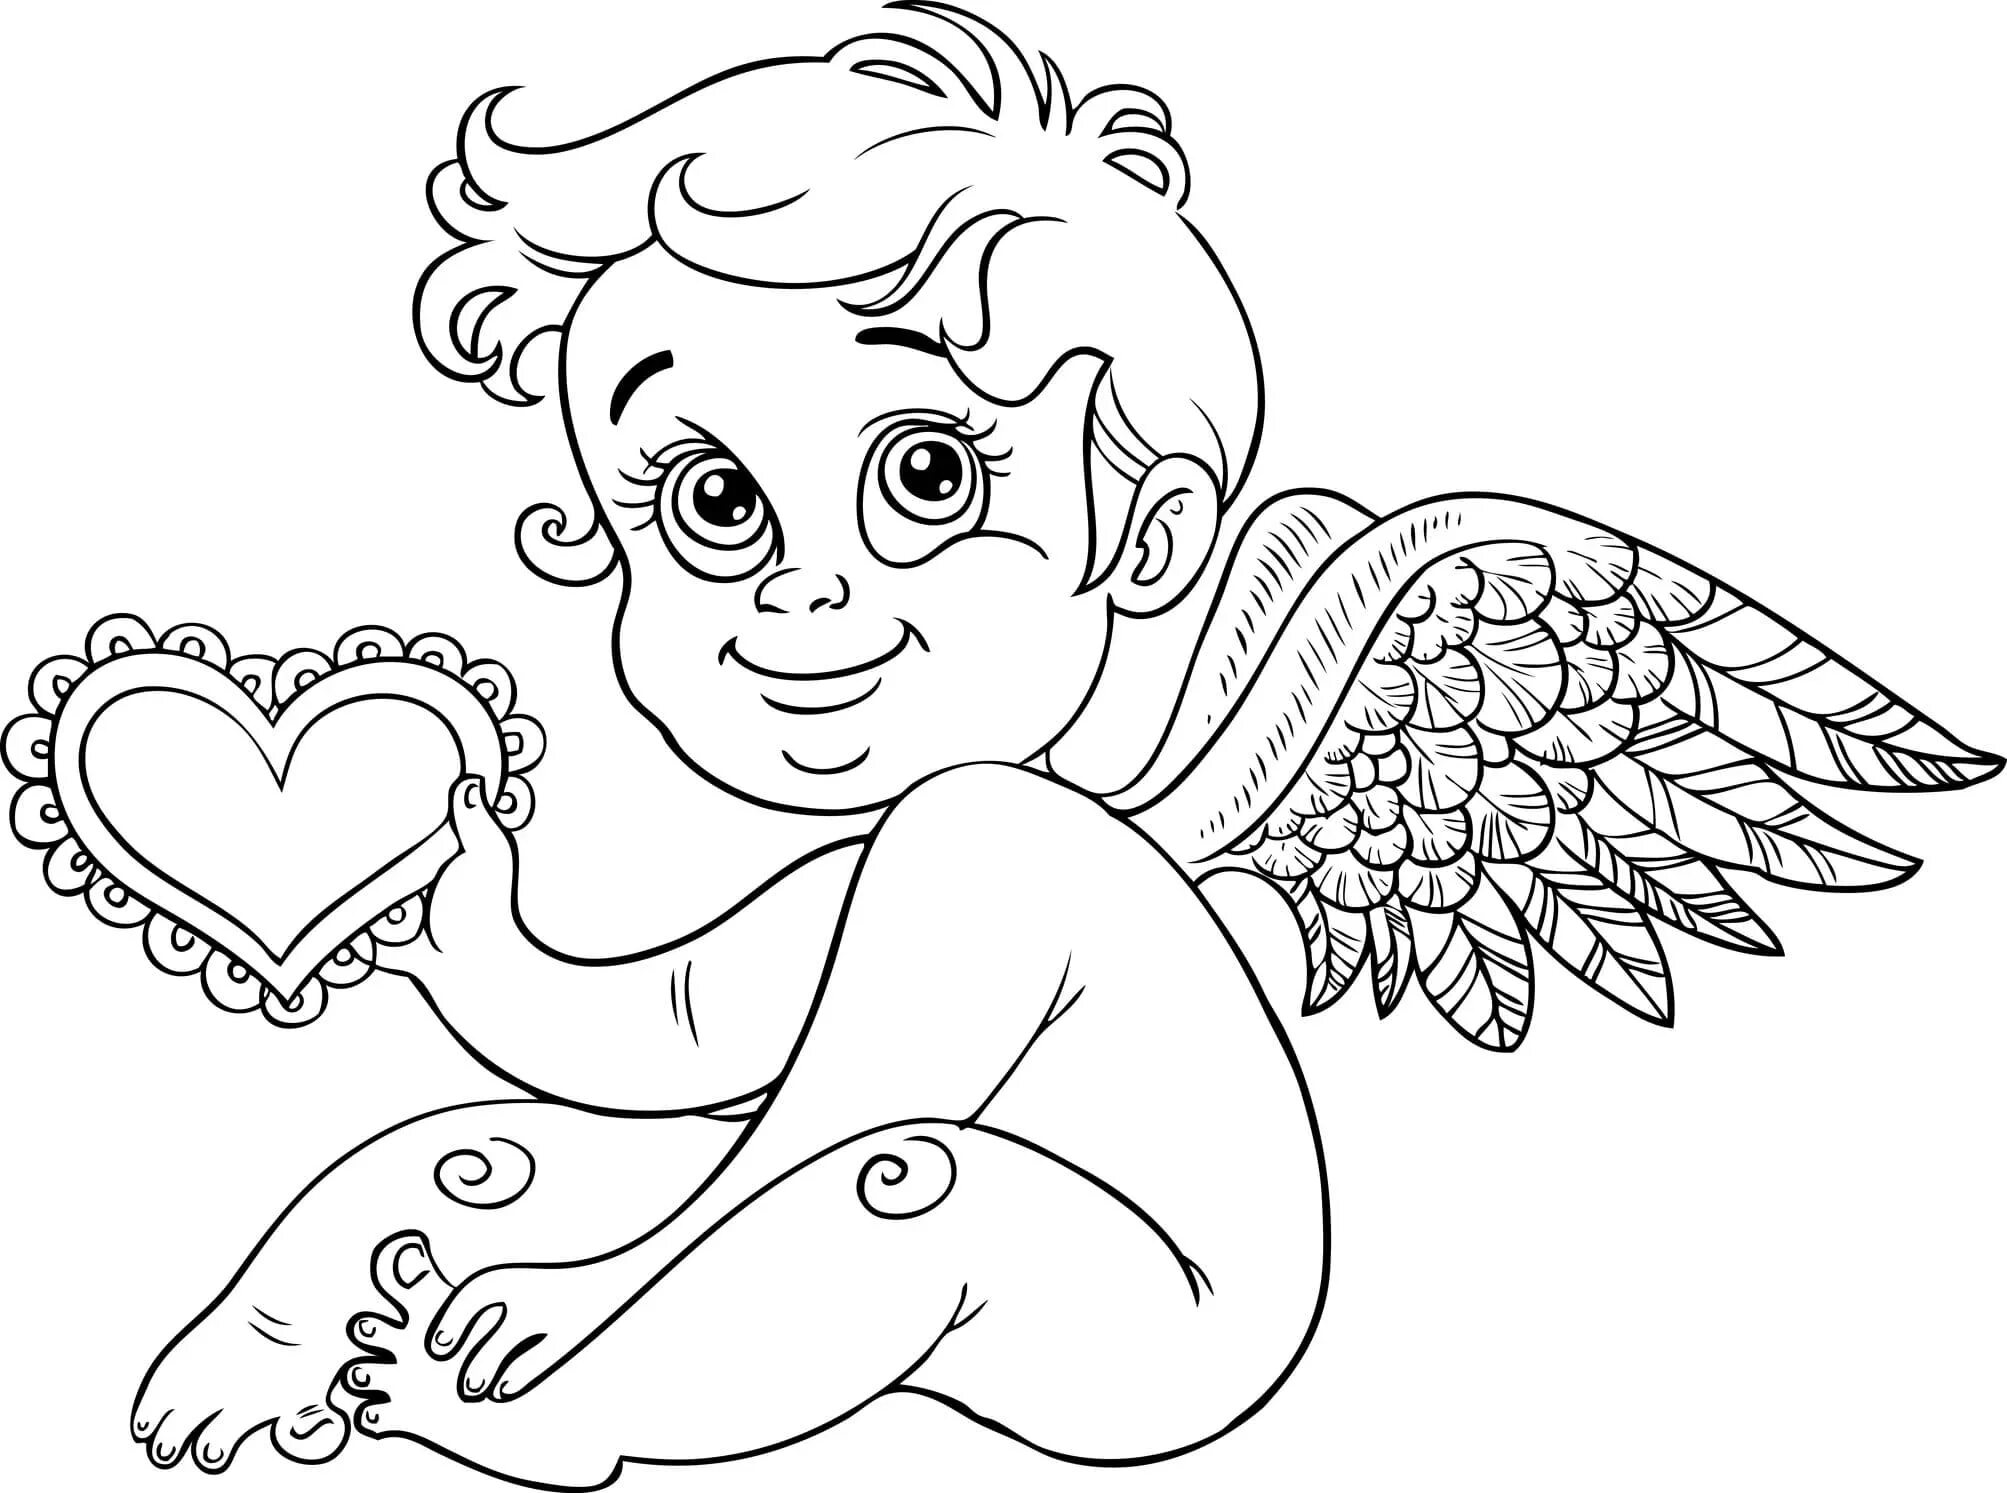 Gorgeous cupid with heart coloring book